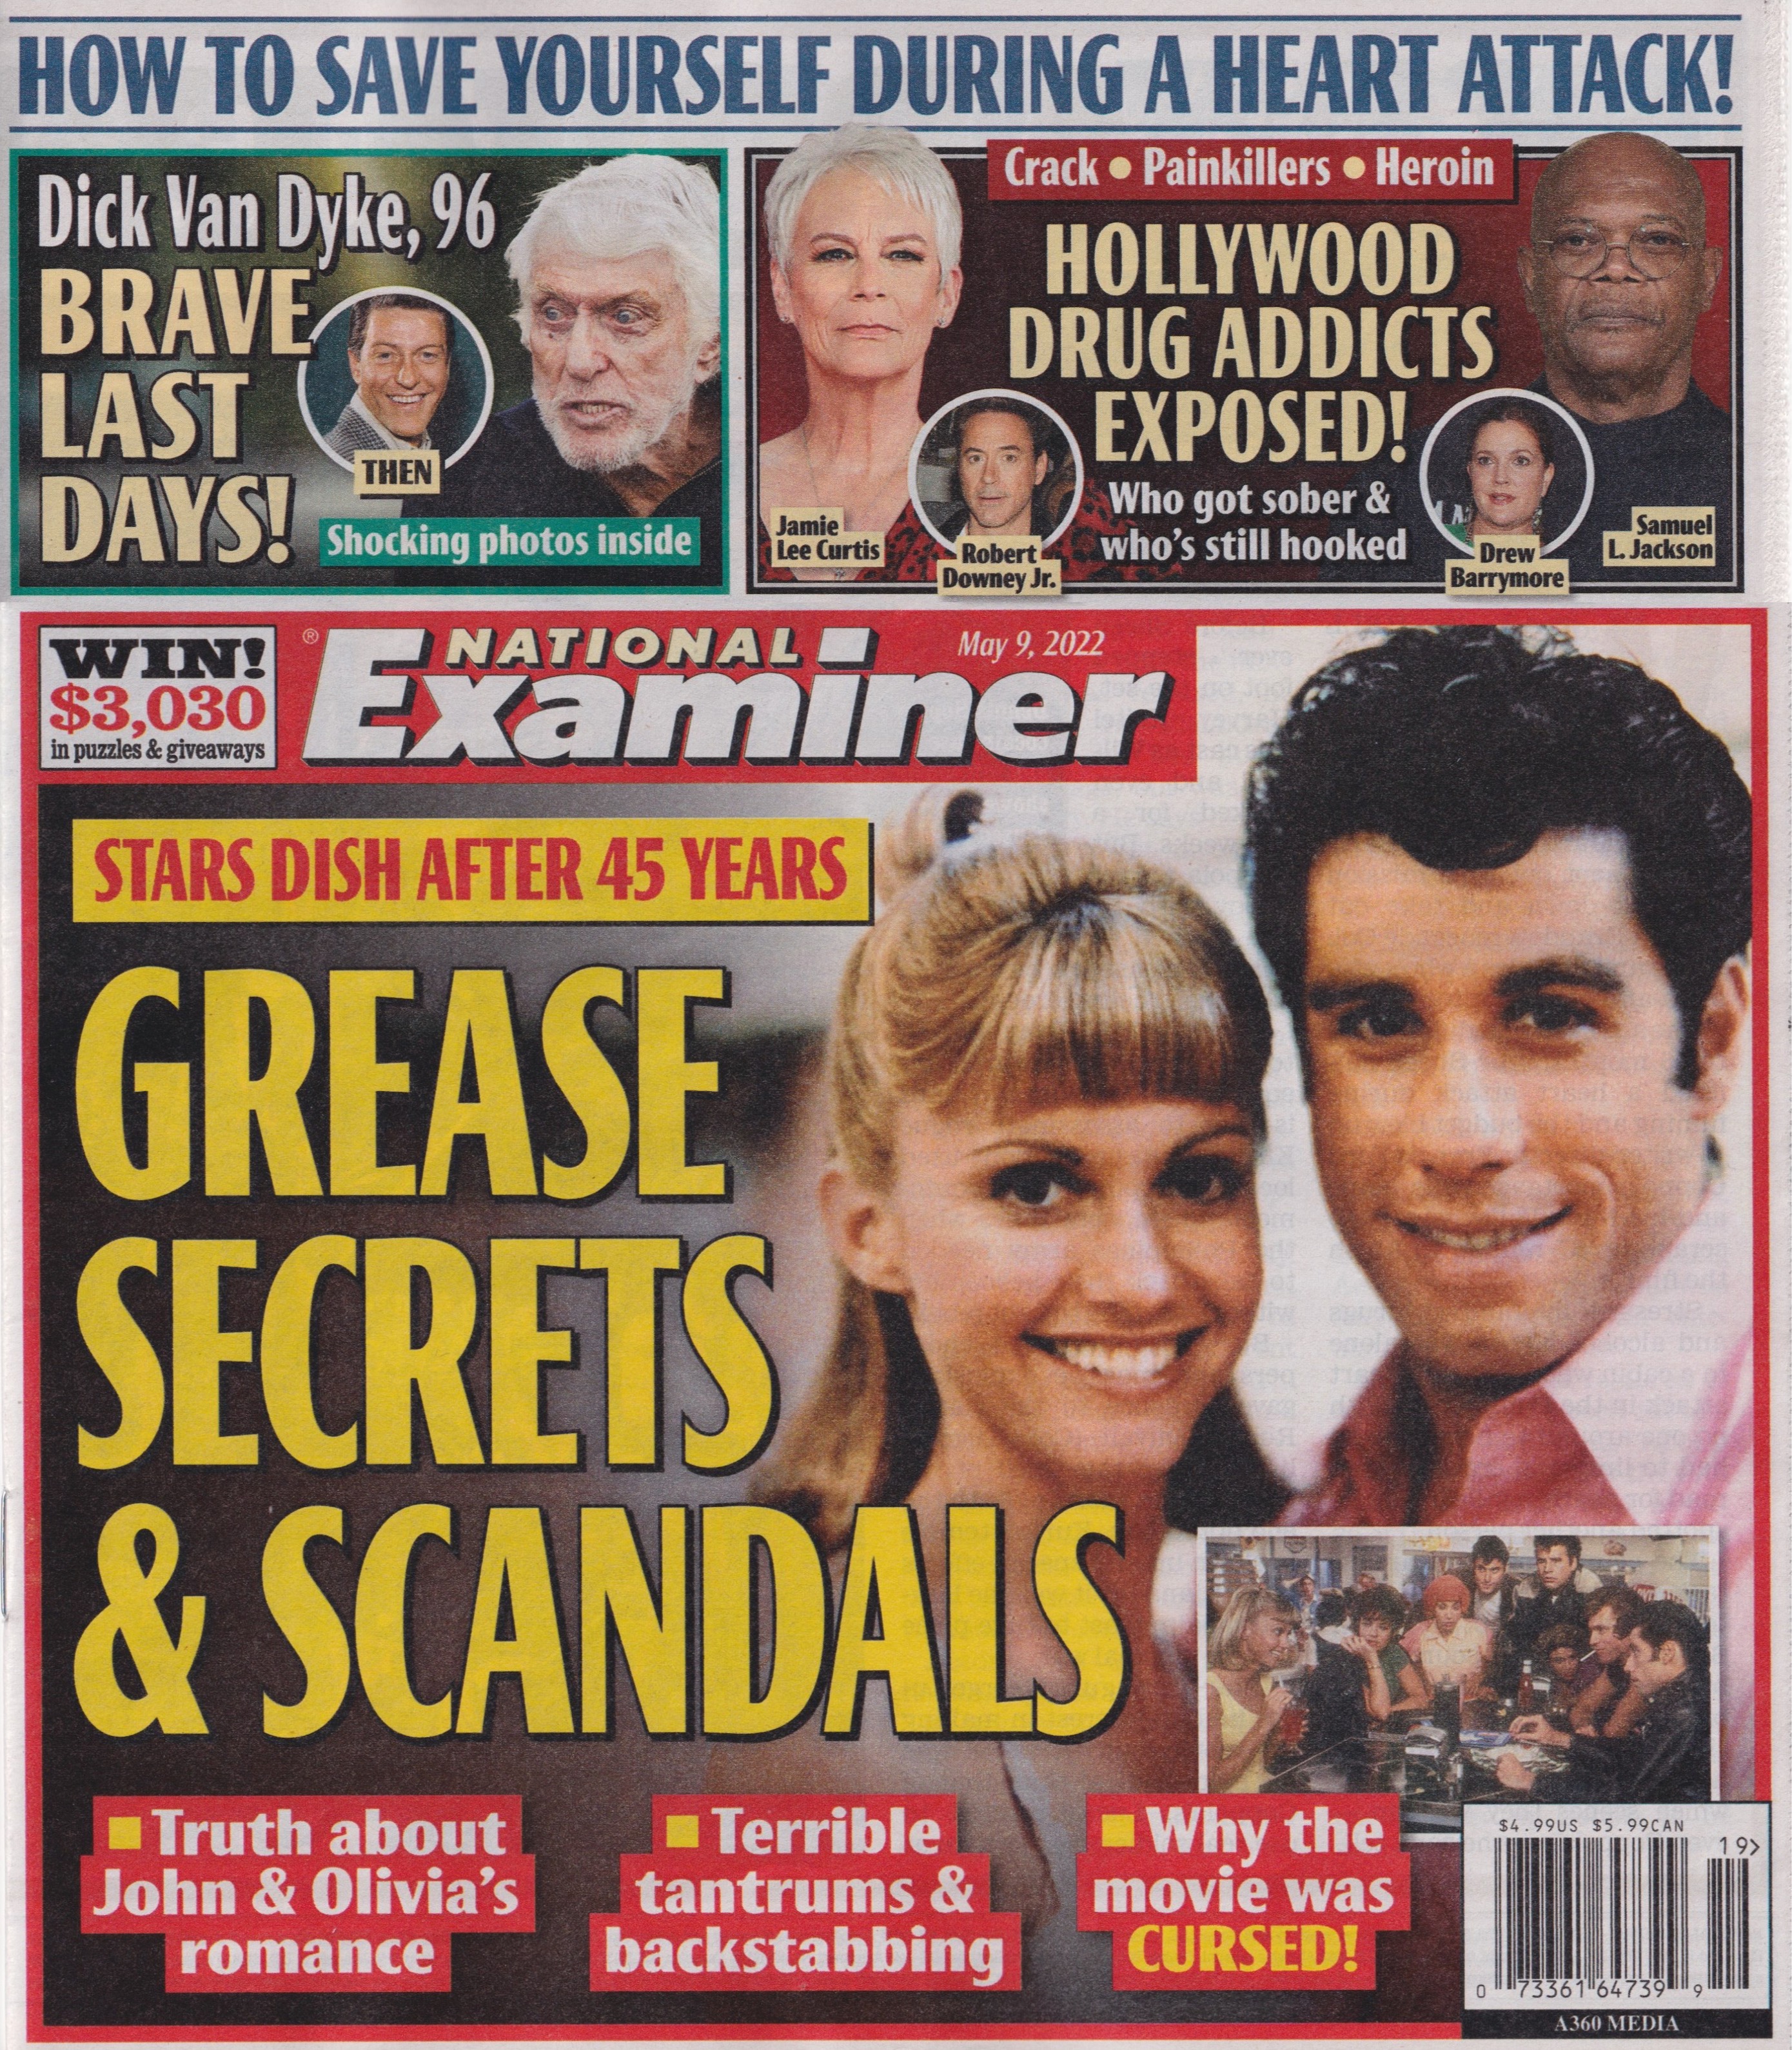 Grease Secrets and Scandals